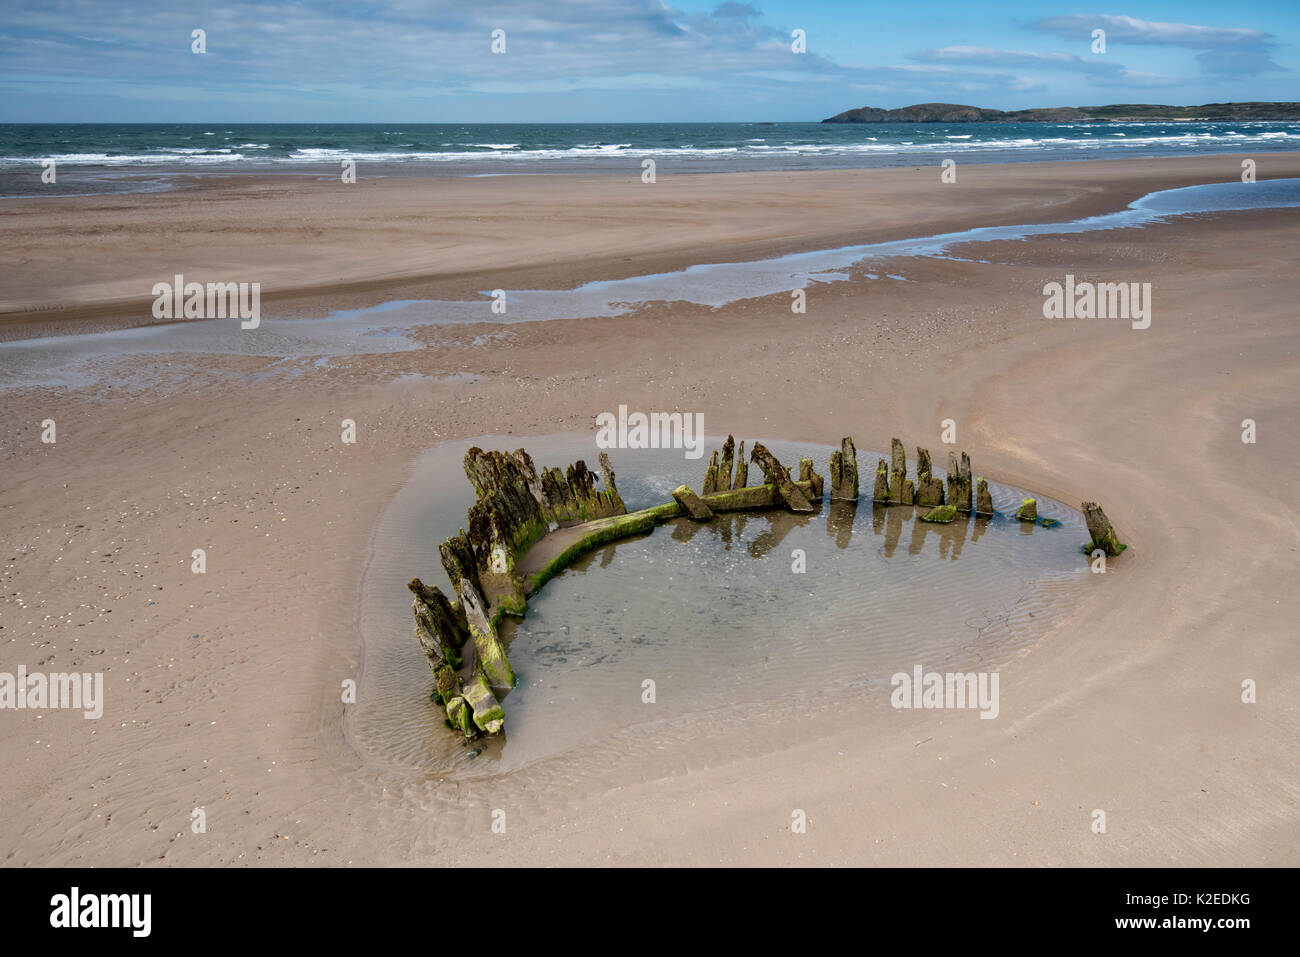 Wreck of the Brig Athena exposed at low tide on Malltraeth beach, Anglesey, North Wales, with Llanddwyn Island and Snowdonia in the background, UK August 2016. Stock Photo